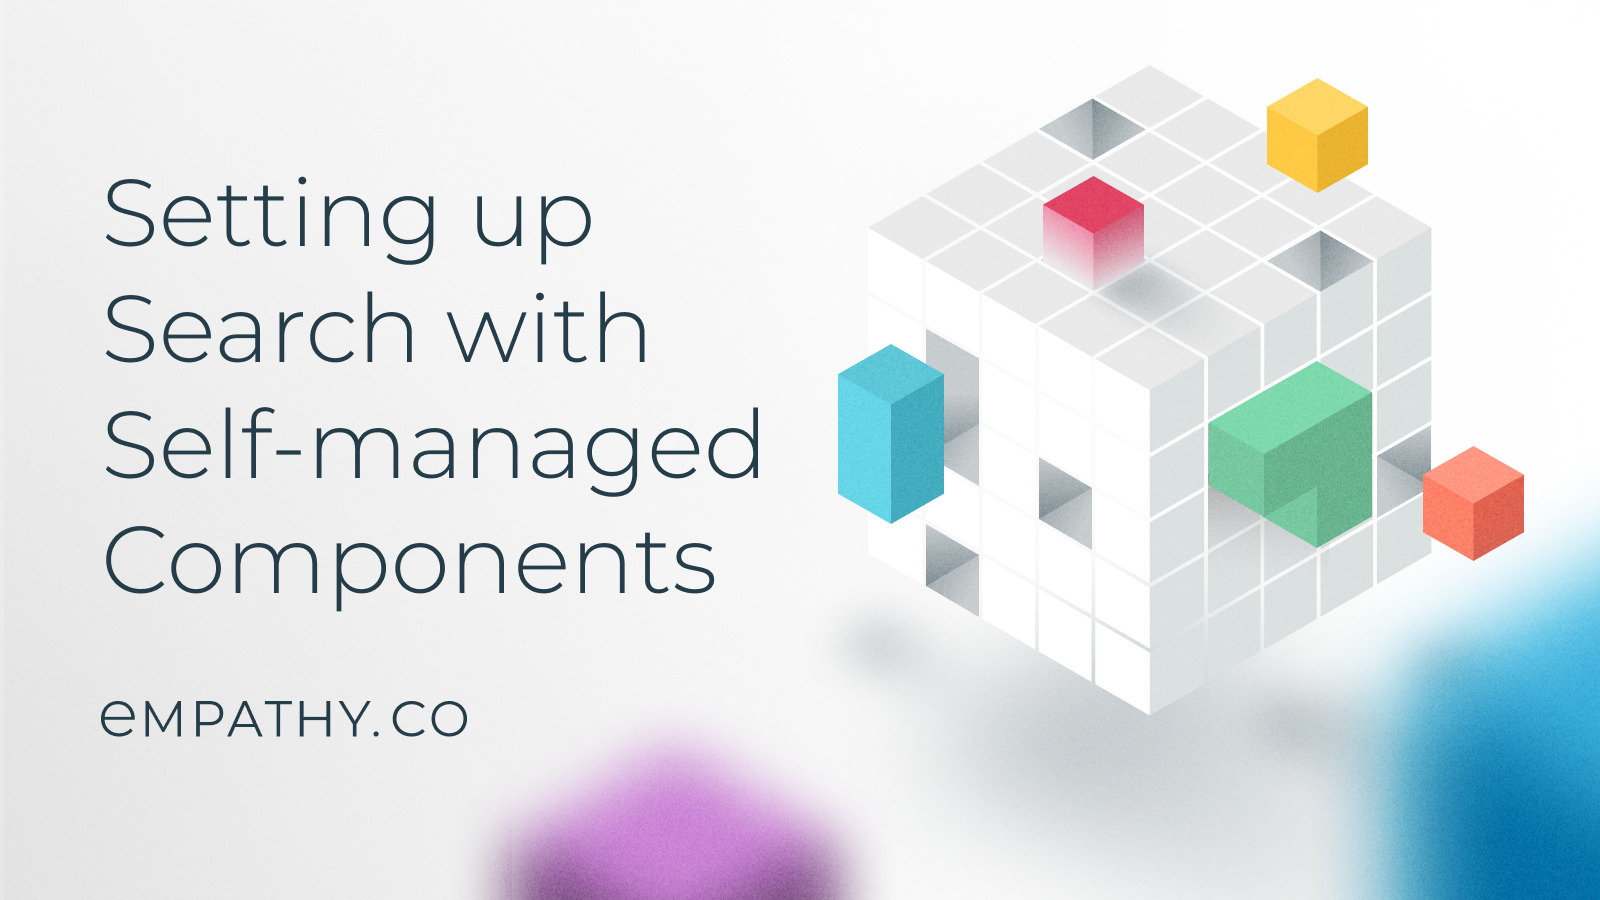 Setting up search with Self-managed Components